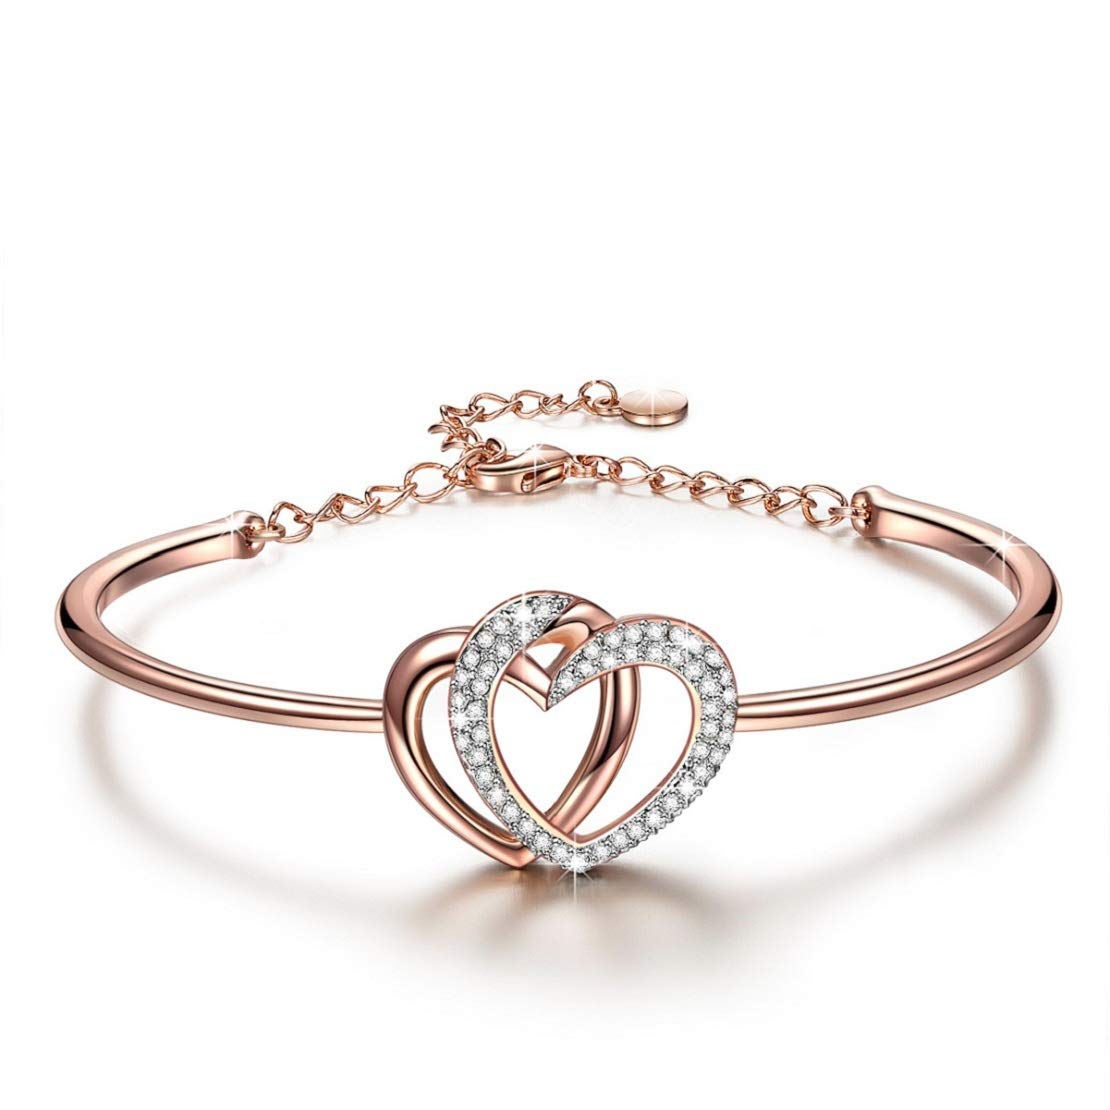 J.NINA Charming Bracelet for Women, Double Heart/Four-leaf/Round/Heart Bracelets with Crystals&Cubic Zirconia, with Luxury Jewelry Box, Valentine's Day, Birthday, Mother's Day Gift for Her Wife Daughter